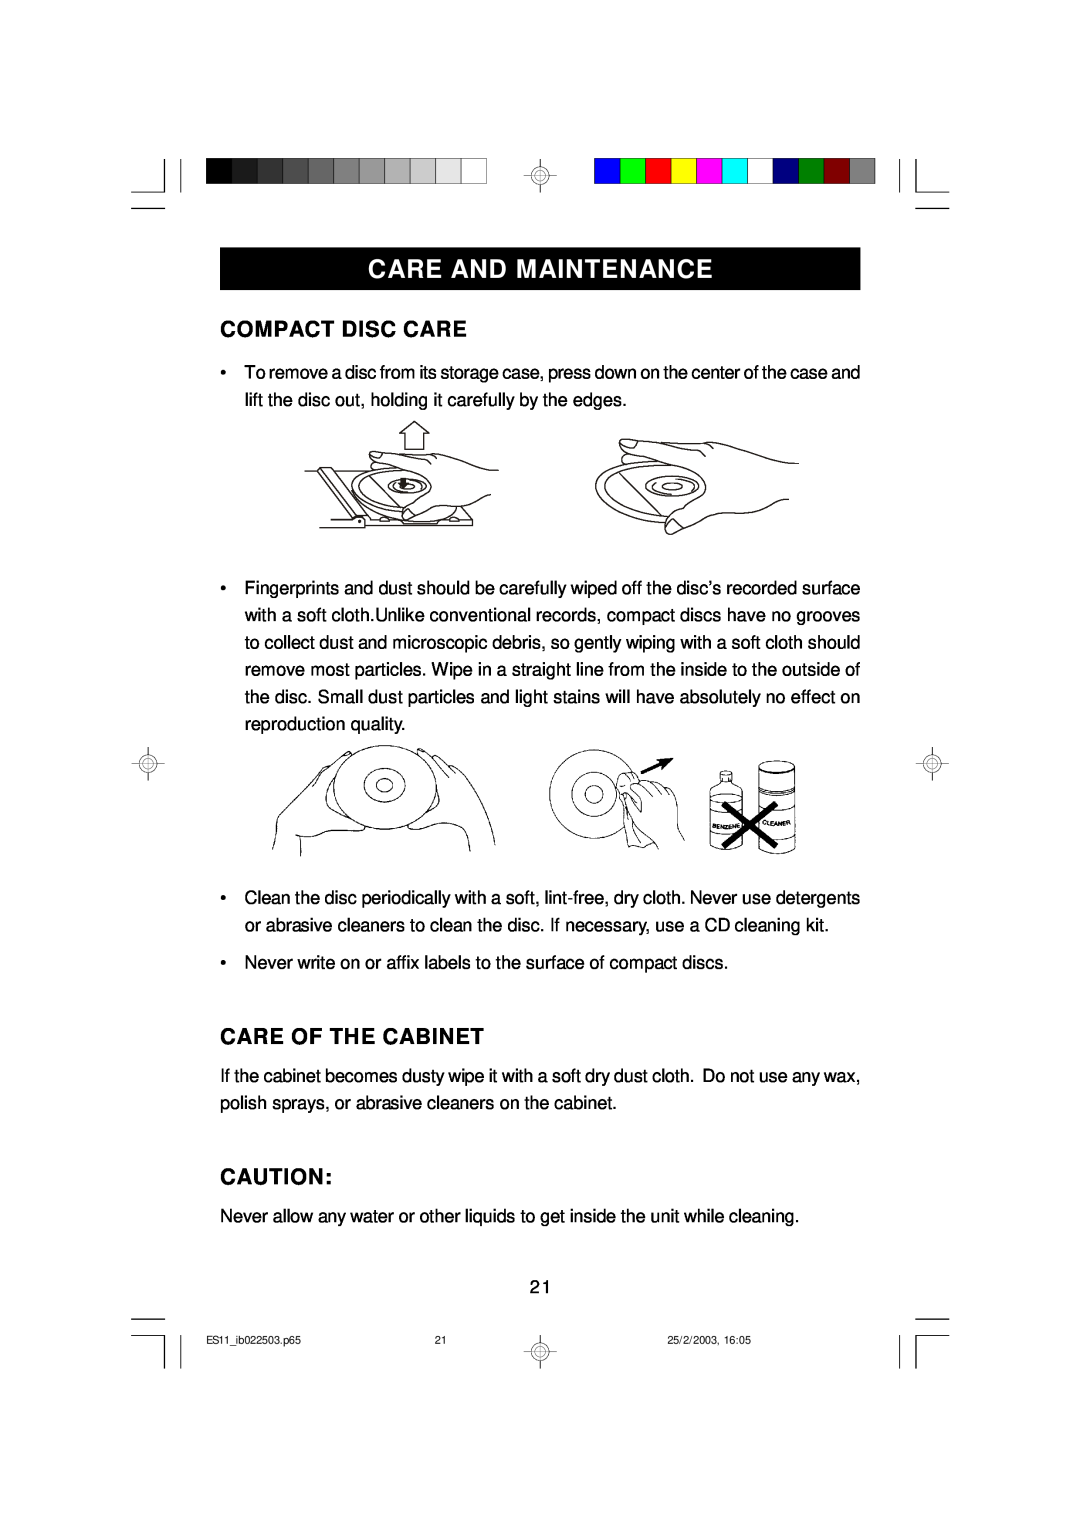 Emerson ES11 owner manual Care And Maintenance, Compact Disc Care, Care Of The Cabinet 